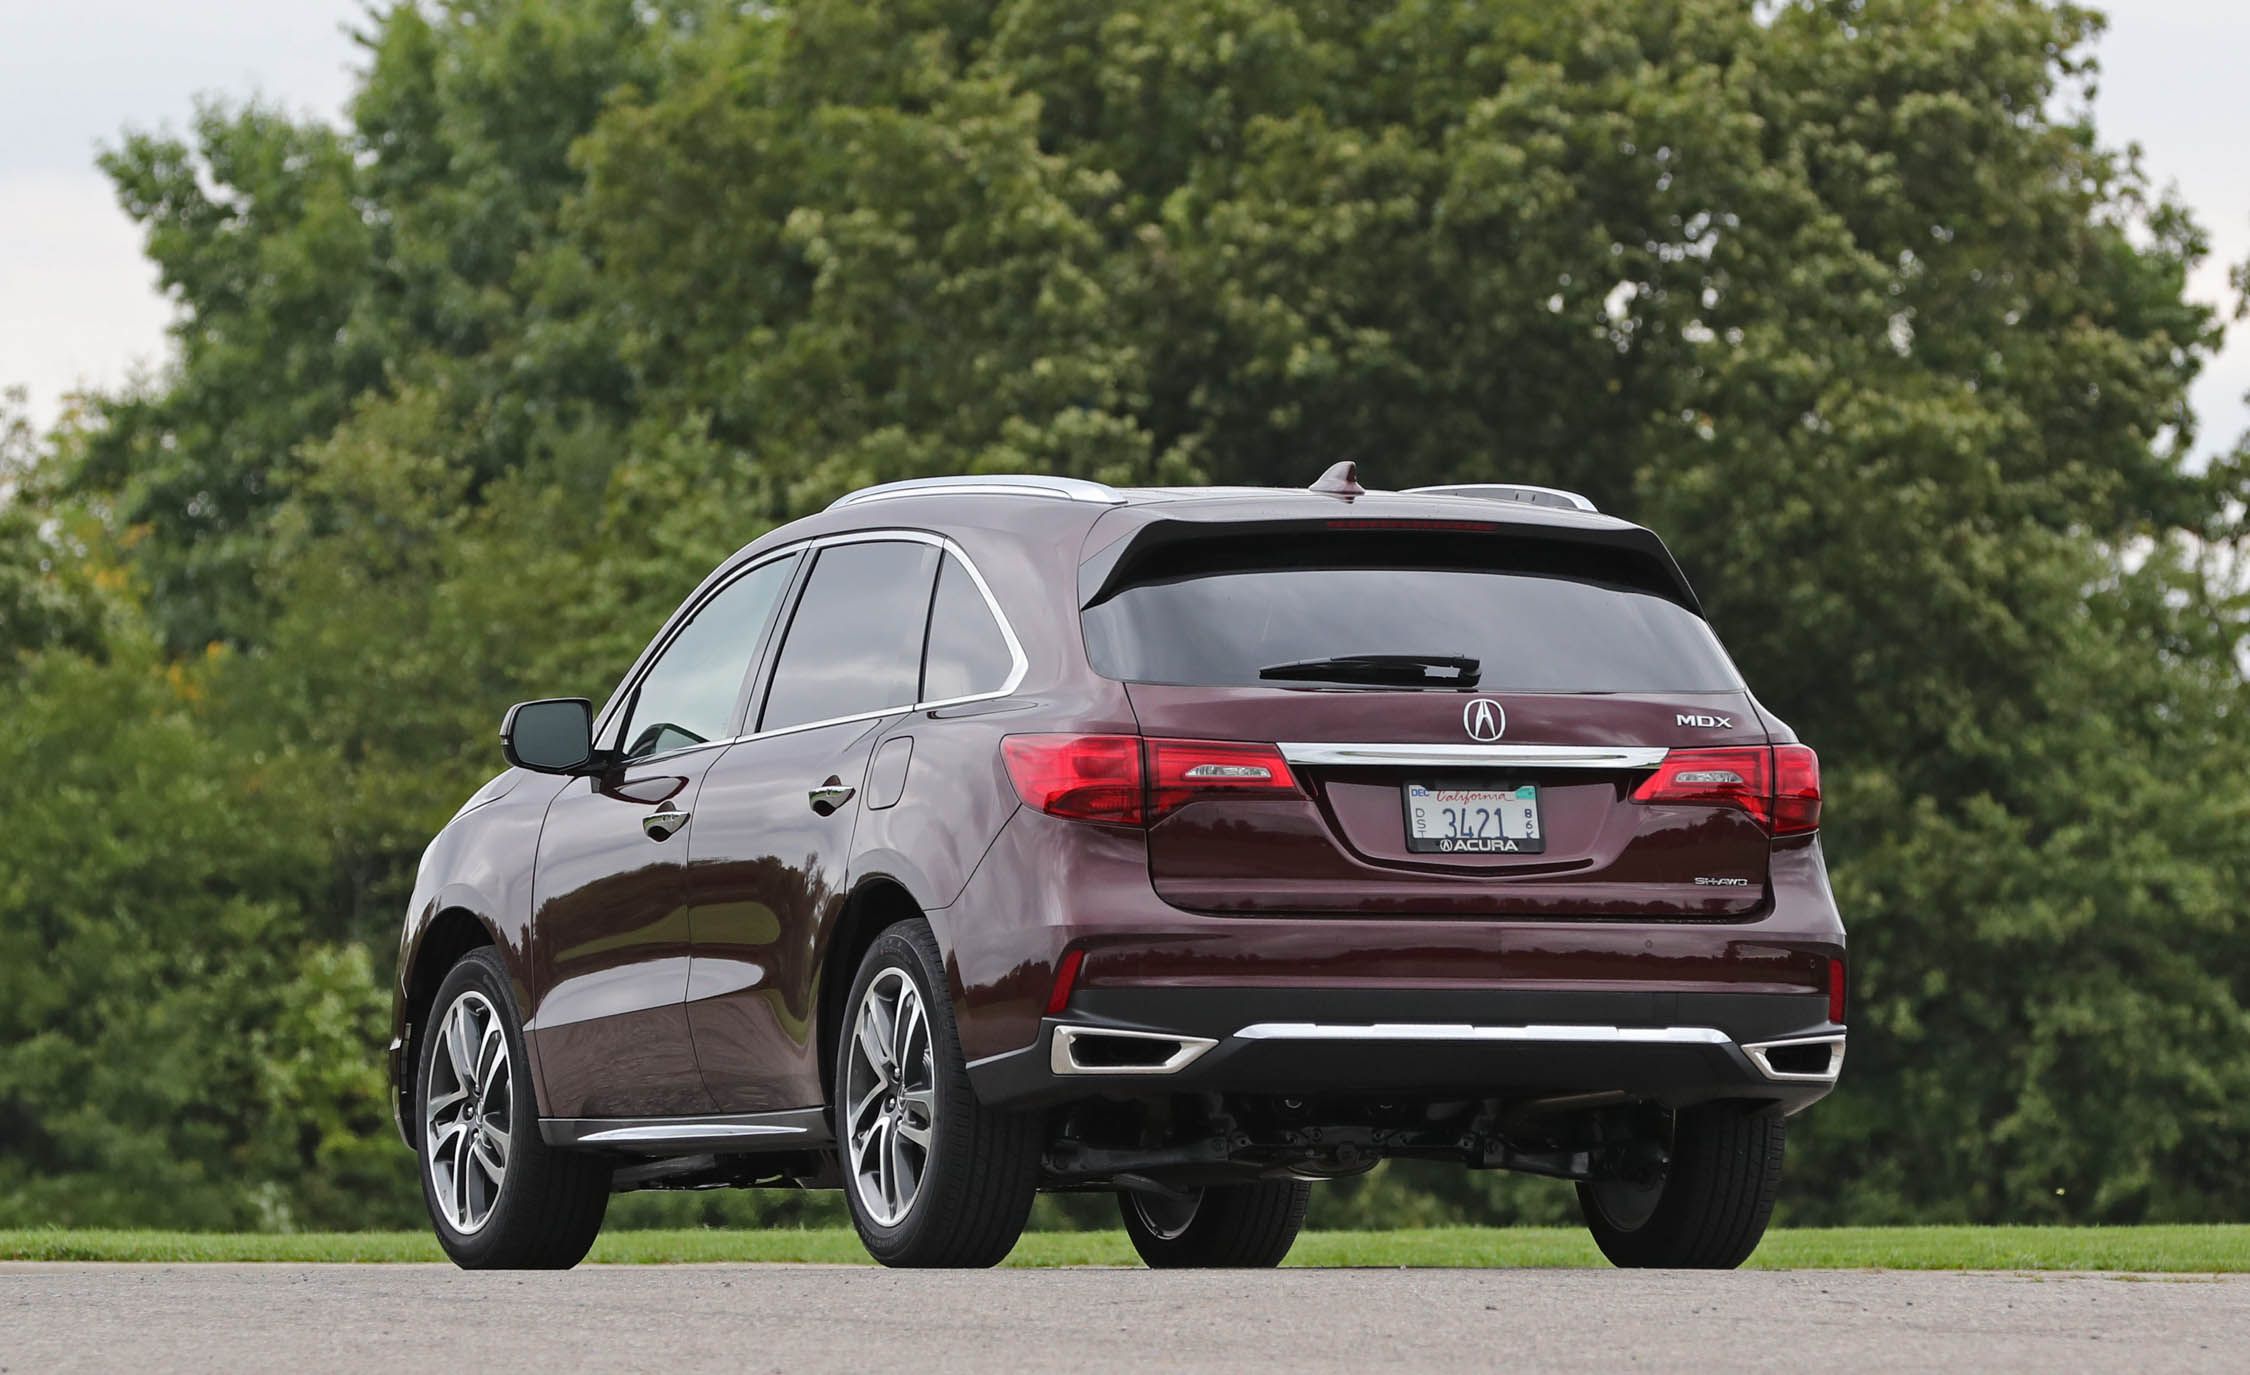 2017 Acura Mdx Exterior Rear (View 17 of 22)